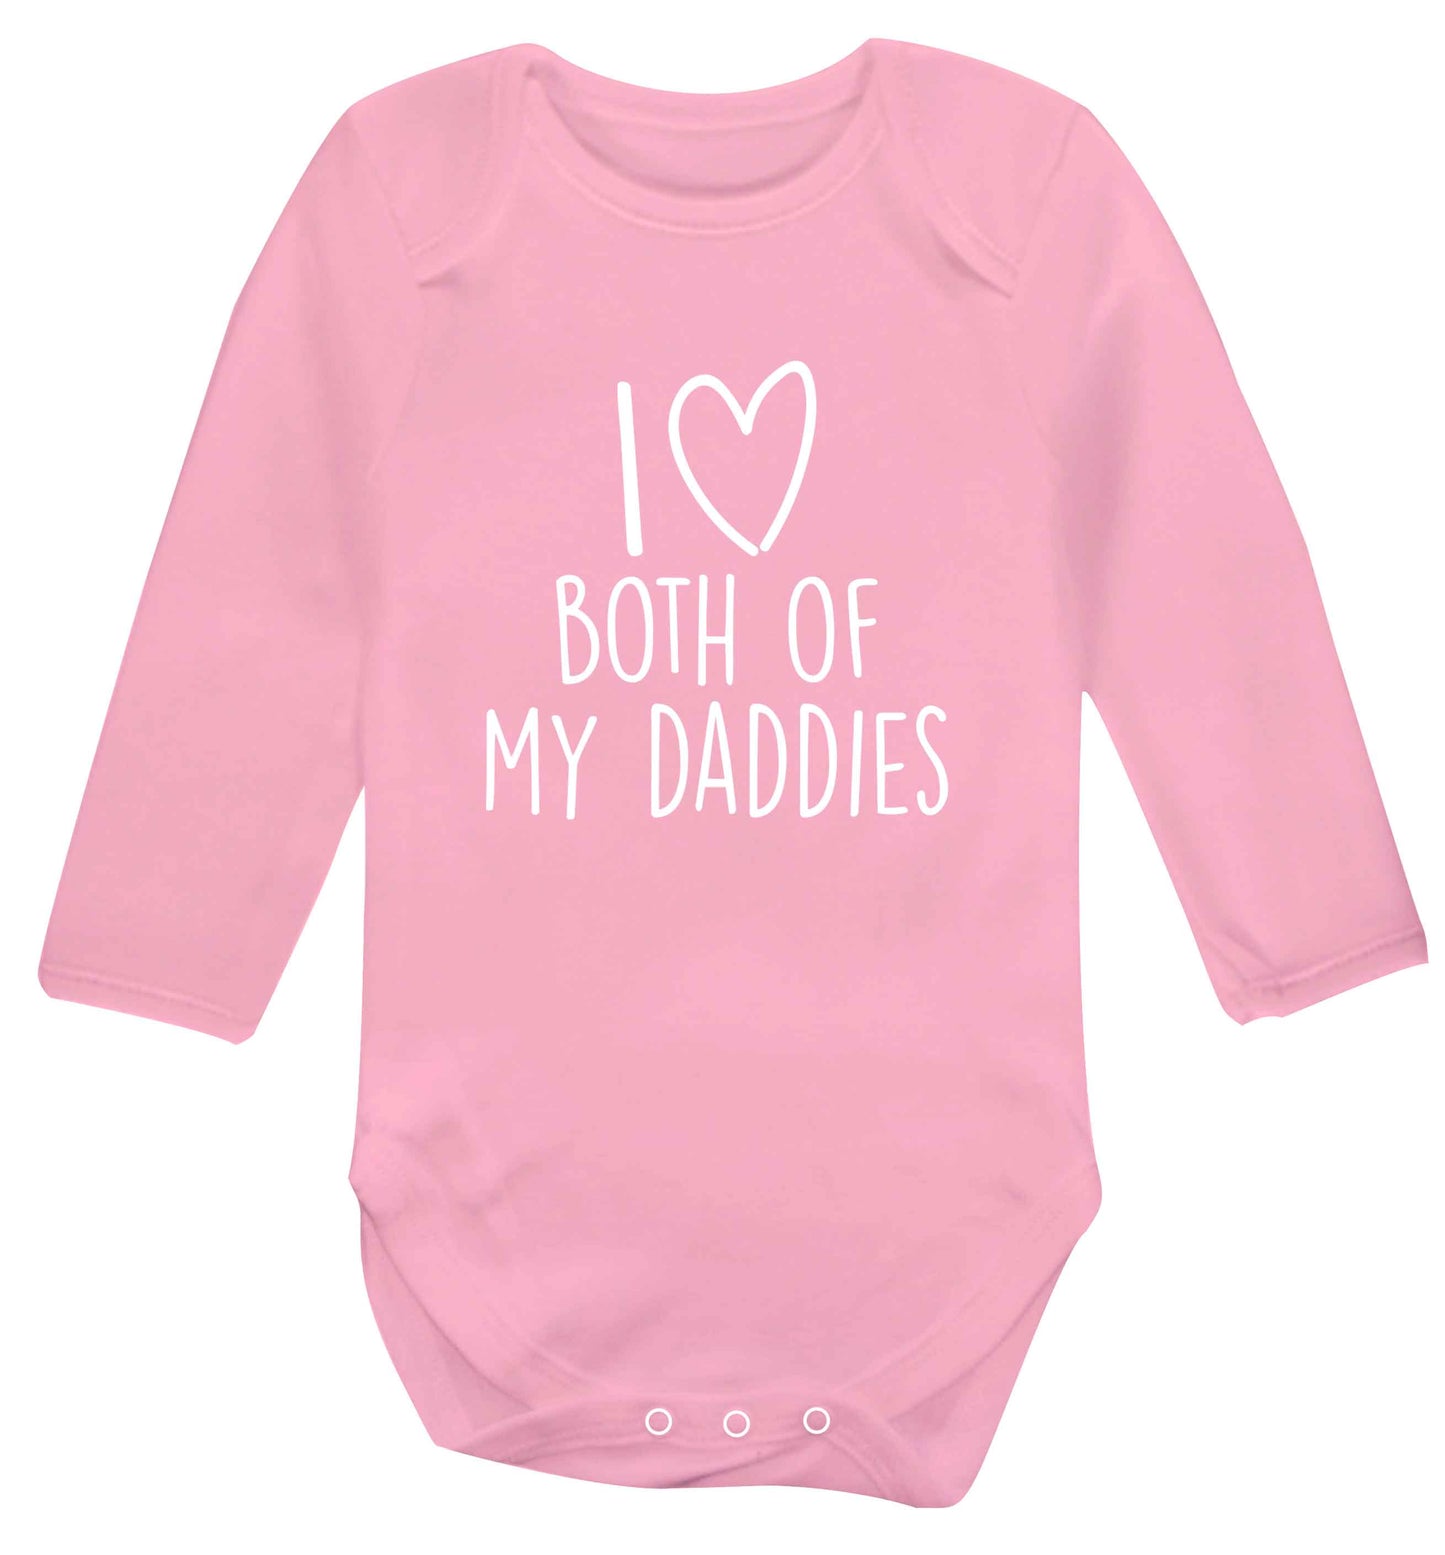 I love both of my daddies baby vest long sleeved pale pink 6-12 months